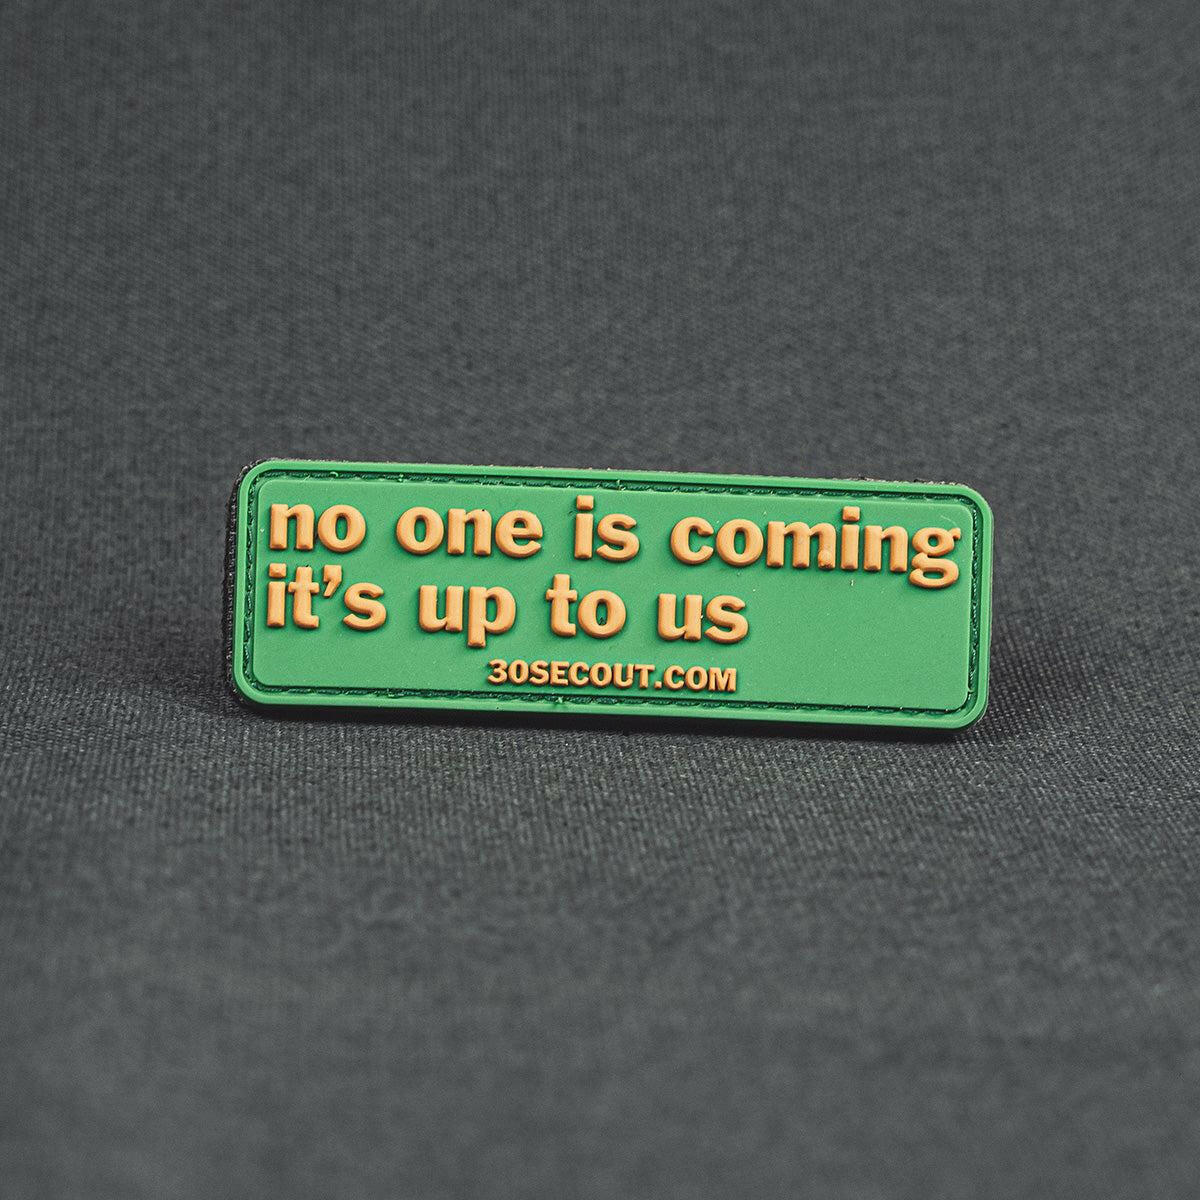 Shh No One Cares Funny Morale Patch Military Tactical patch Made